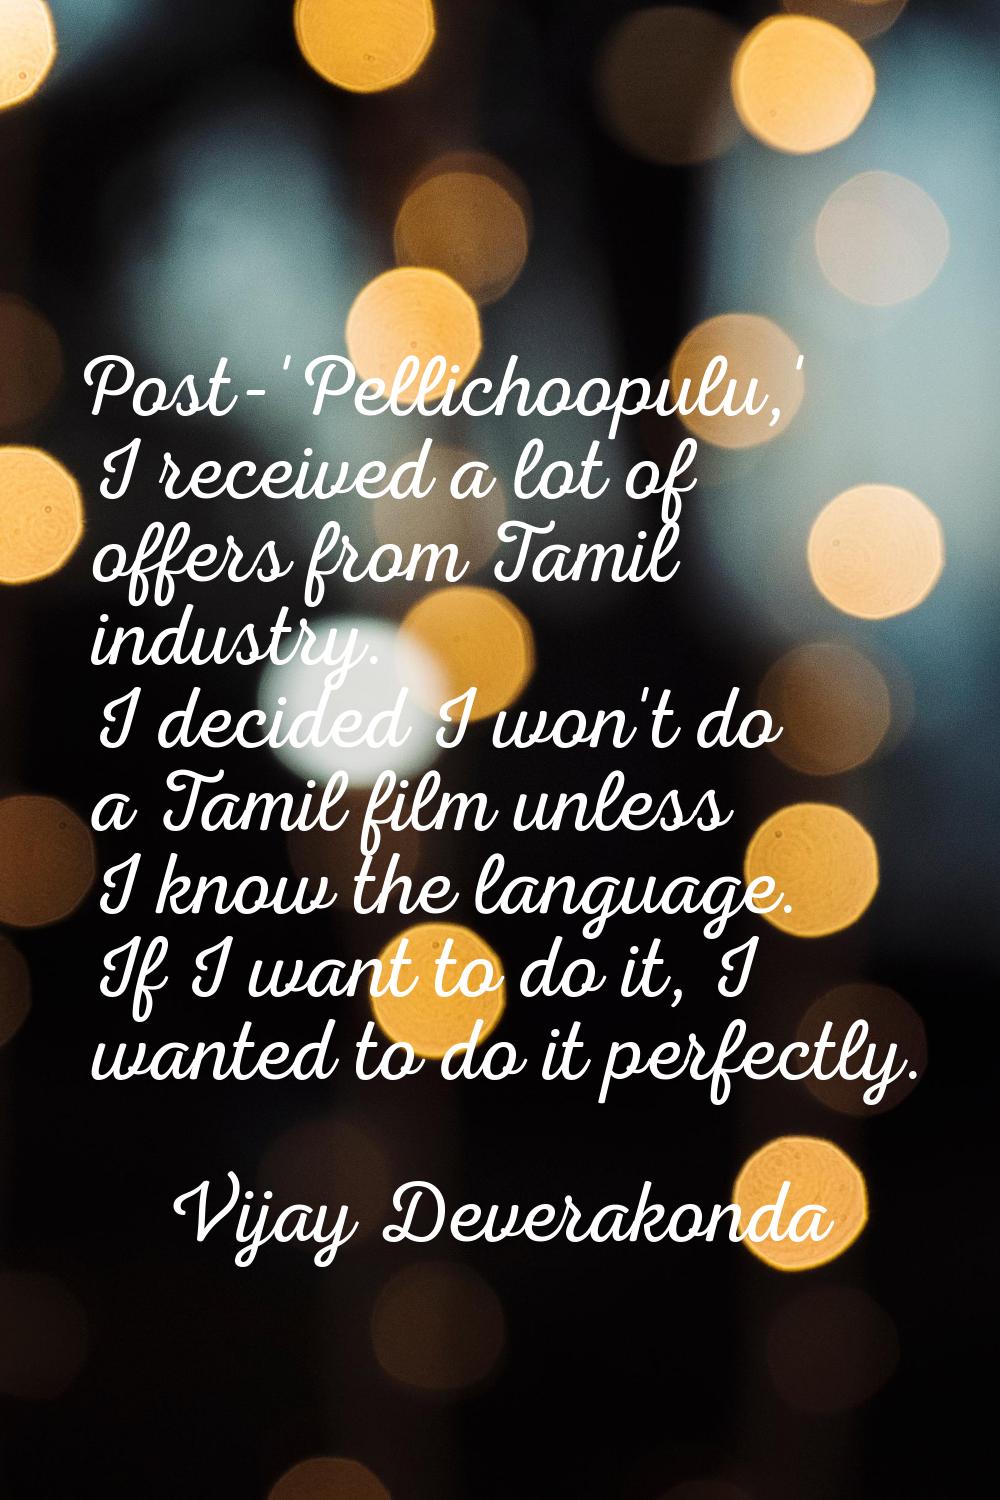 Post-'Pellichoopulu,' I received a lot of offers from Tamil industry. I decided I won't do a Tamil 